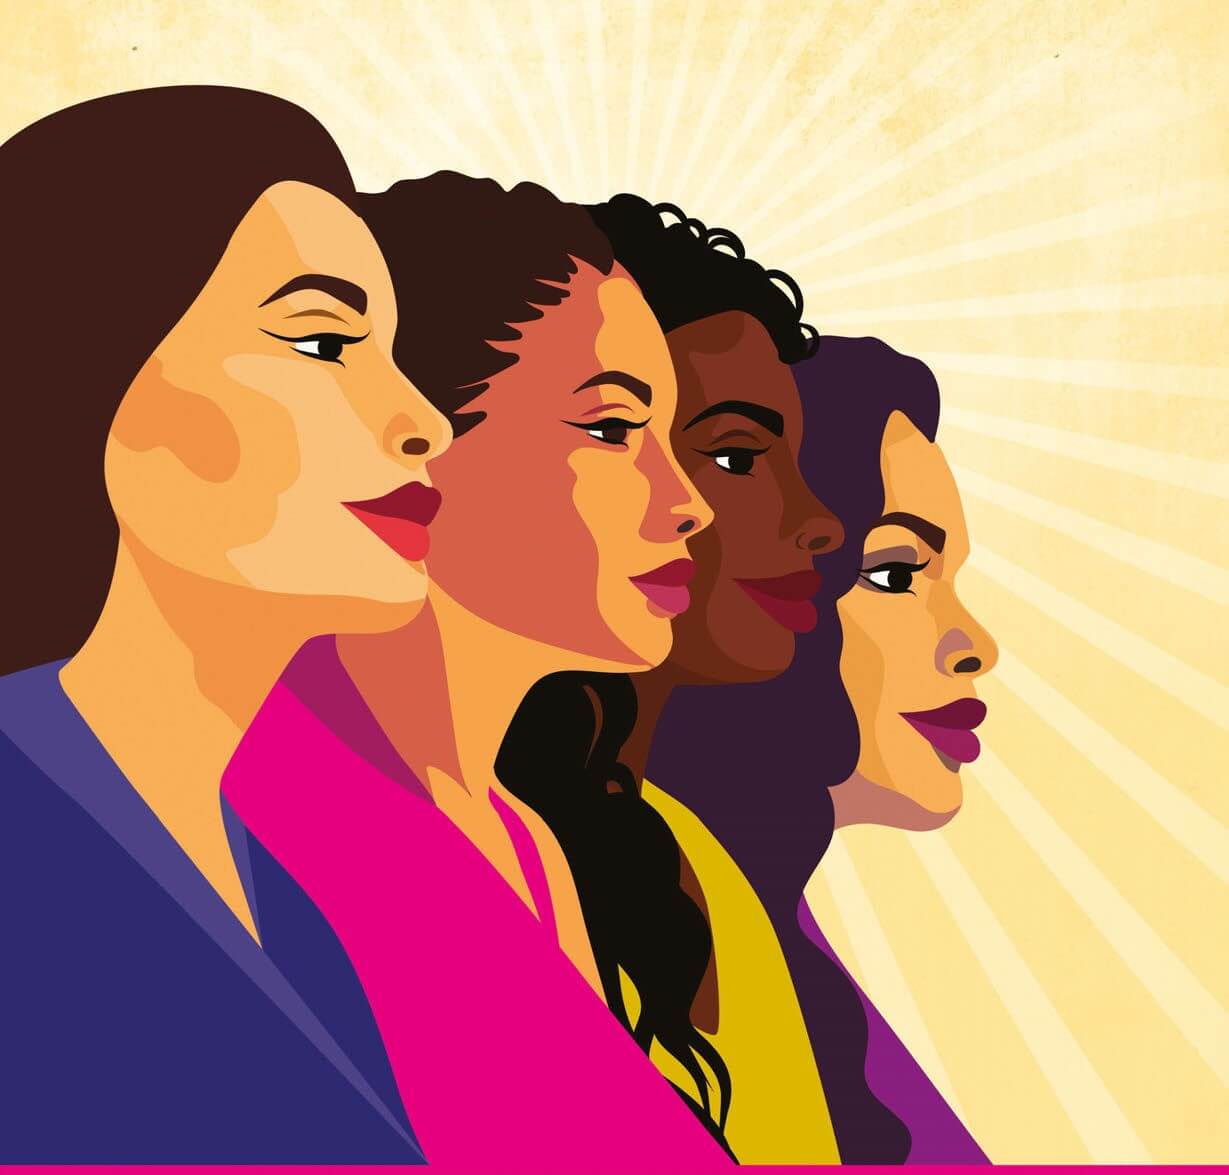 Four illustrated women stand in profile in a row in front of a yellow sunburst.